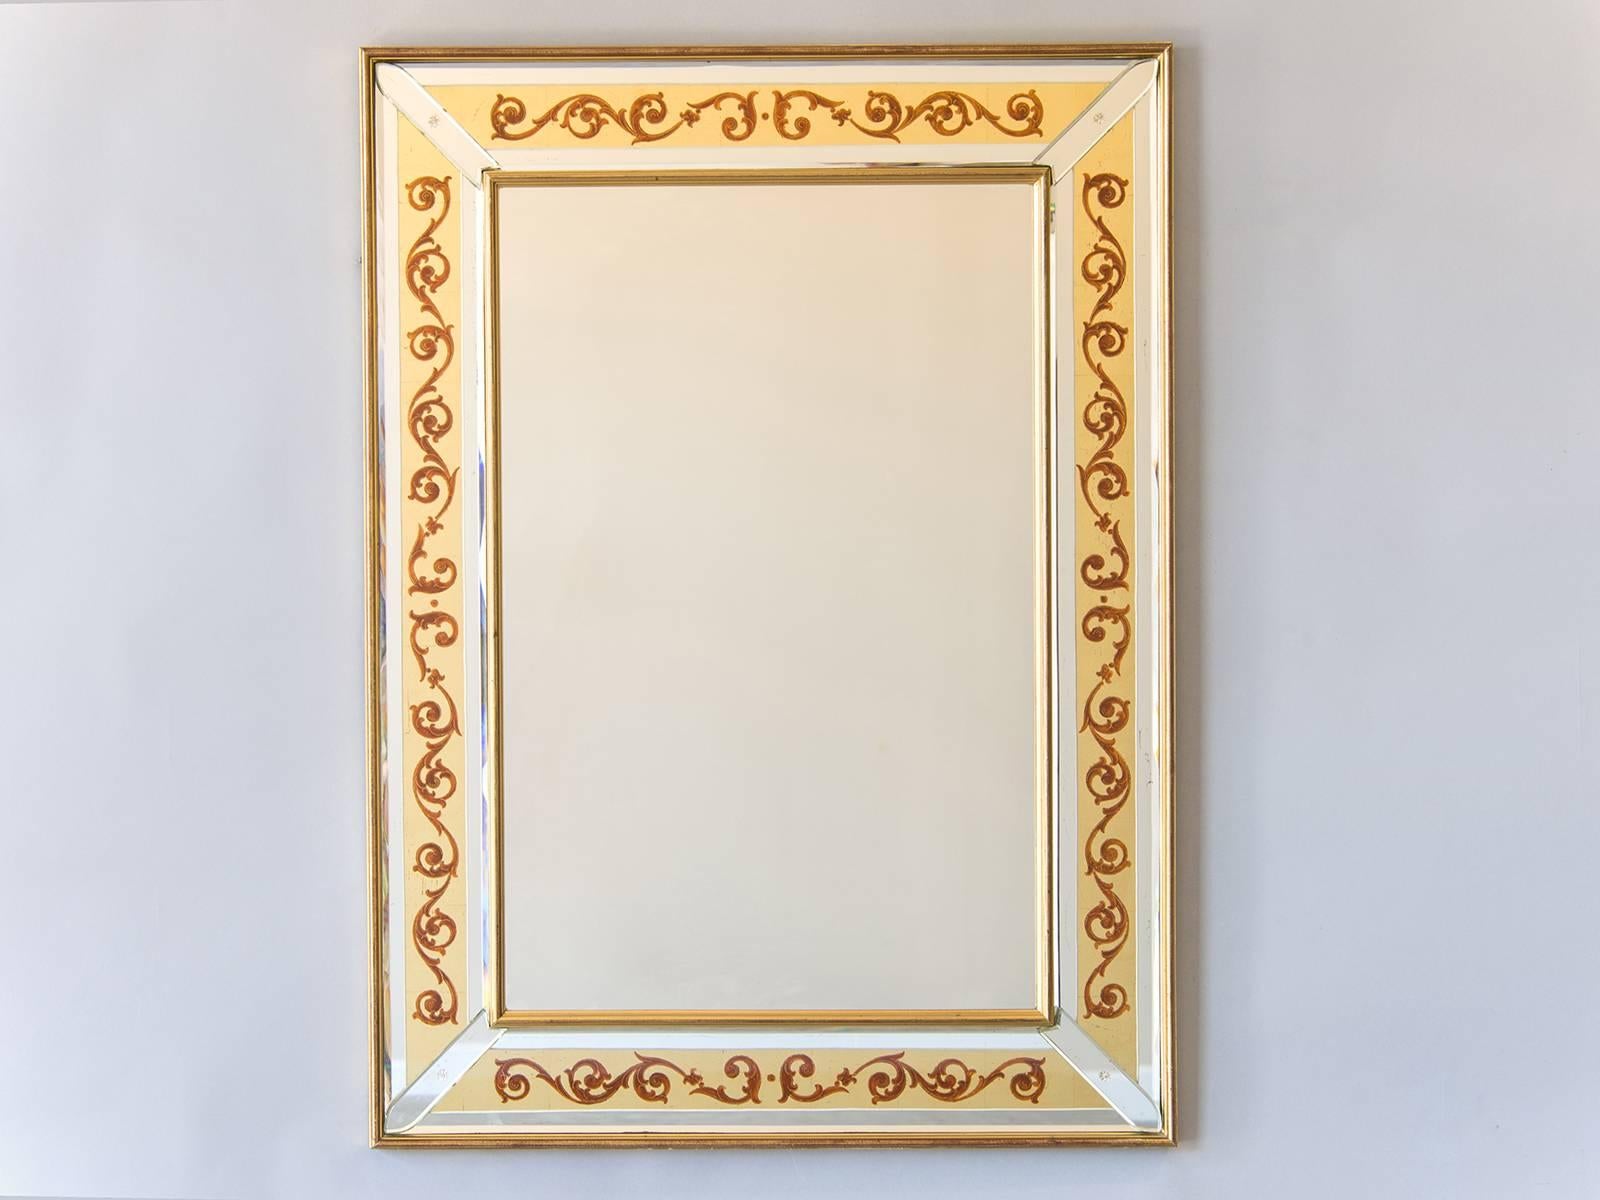 The bold form of the scroll contained within the borders of this vintage Italian mirror, circa 1950, is actually painted on the reverse side of the mirror glass using a technique known as 